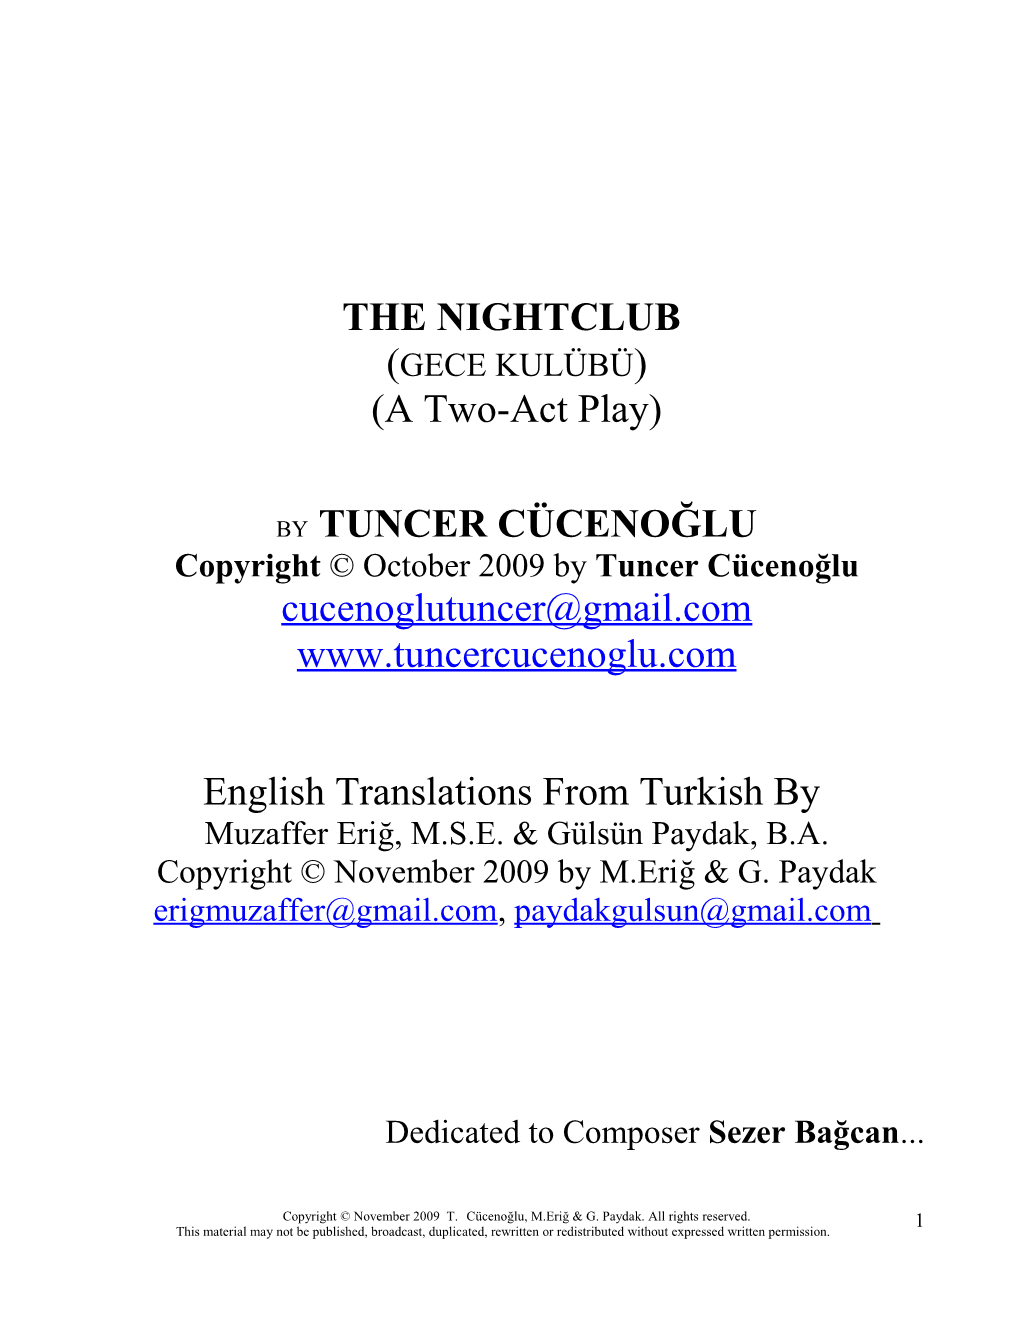 English Translations from Turkish By